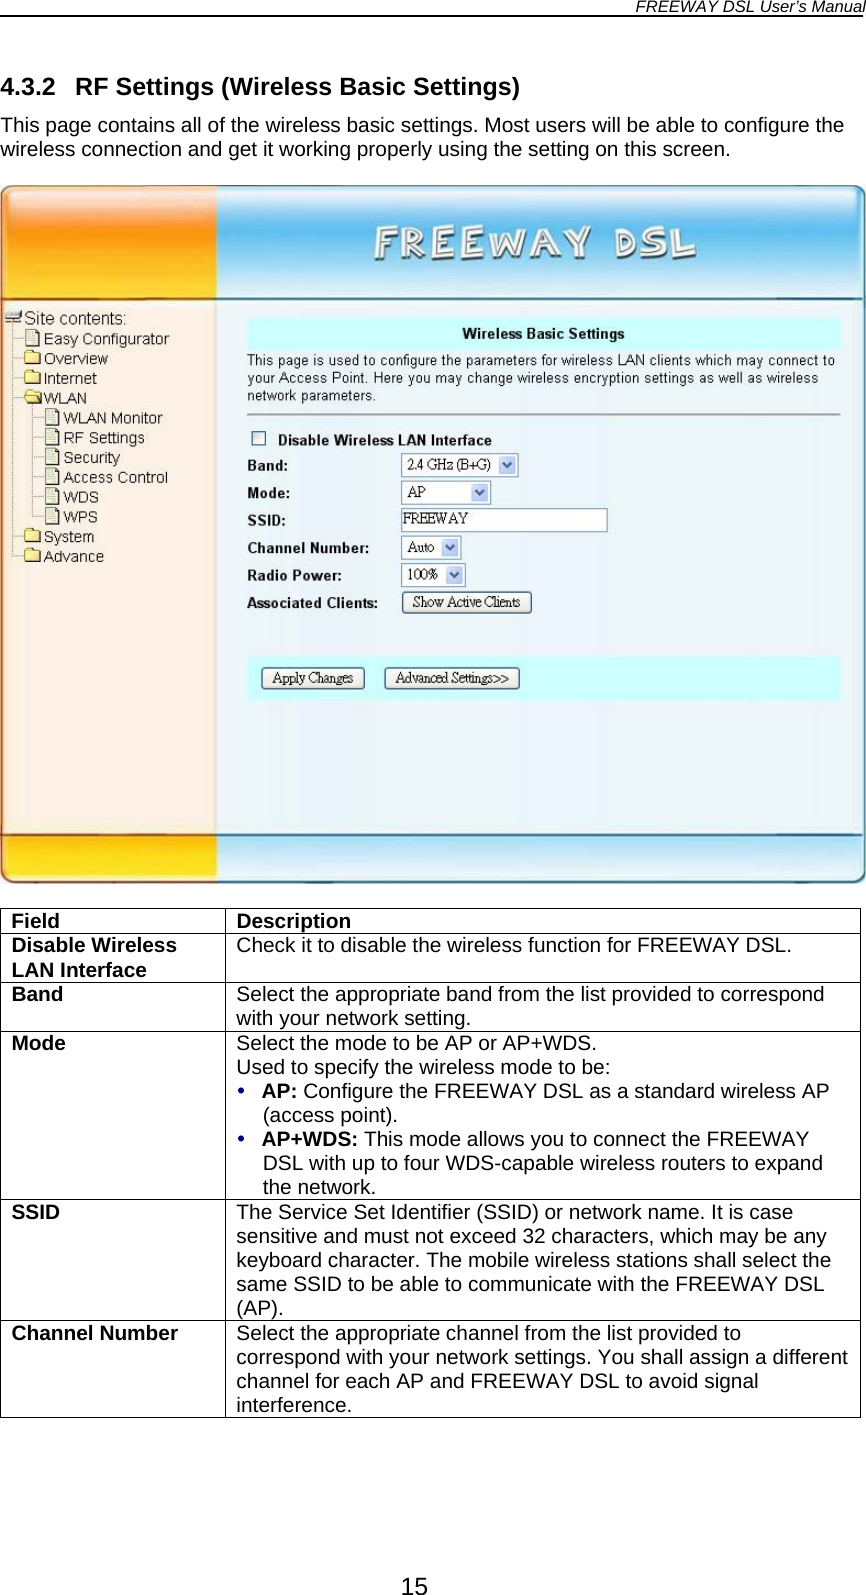 FREEWAY DSL User’s Manual  4.3.2  RF Settings (Wireless Basic Settings) This page contains all of the wireless basic settings. Most users will be able to configure the wireless connection and get it working properly using the setting on this screen.    Field Description Disable Wireless LAN Interface  Check it to disable the wireless function for FREEWAY DSL. Band  Select the appropriate band from the list provided to correspond with your network setting. Mode  Select the mode to be AP or AP+WDS. Used to specify the wireless mode to be:  AP: Configure the FREEWAY DSL as a standard wireless AP (access point).  AP+WDS: This mode allows you to connect the FREEWAY DSL with up to four WDS-capable wireless routers to expand the network. SSID  The Service Set Identifier (SSID) or network name. It is case sensitive and must not exceed 32 characters, which may be any keyboard character. The mobile wireless stations shall select the same SSID to be able to communicate with the FREEWAY DSL (AP). Channel Number  Select the appropriate channel from the list provided to correspond with your network settings. You shall assign a different channel for each AP and FREEWAY DSL to avoid signal interference. 15 